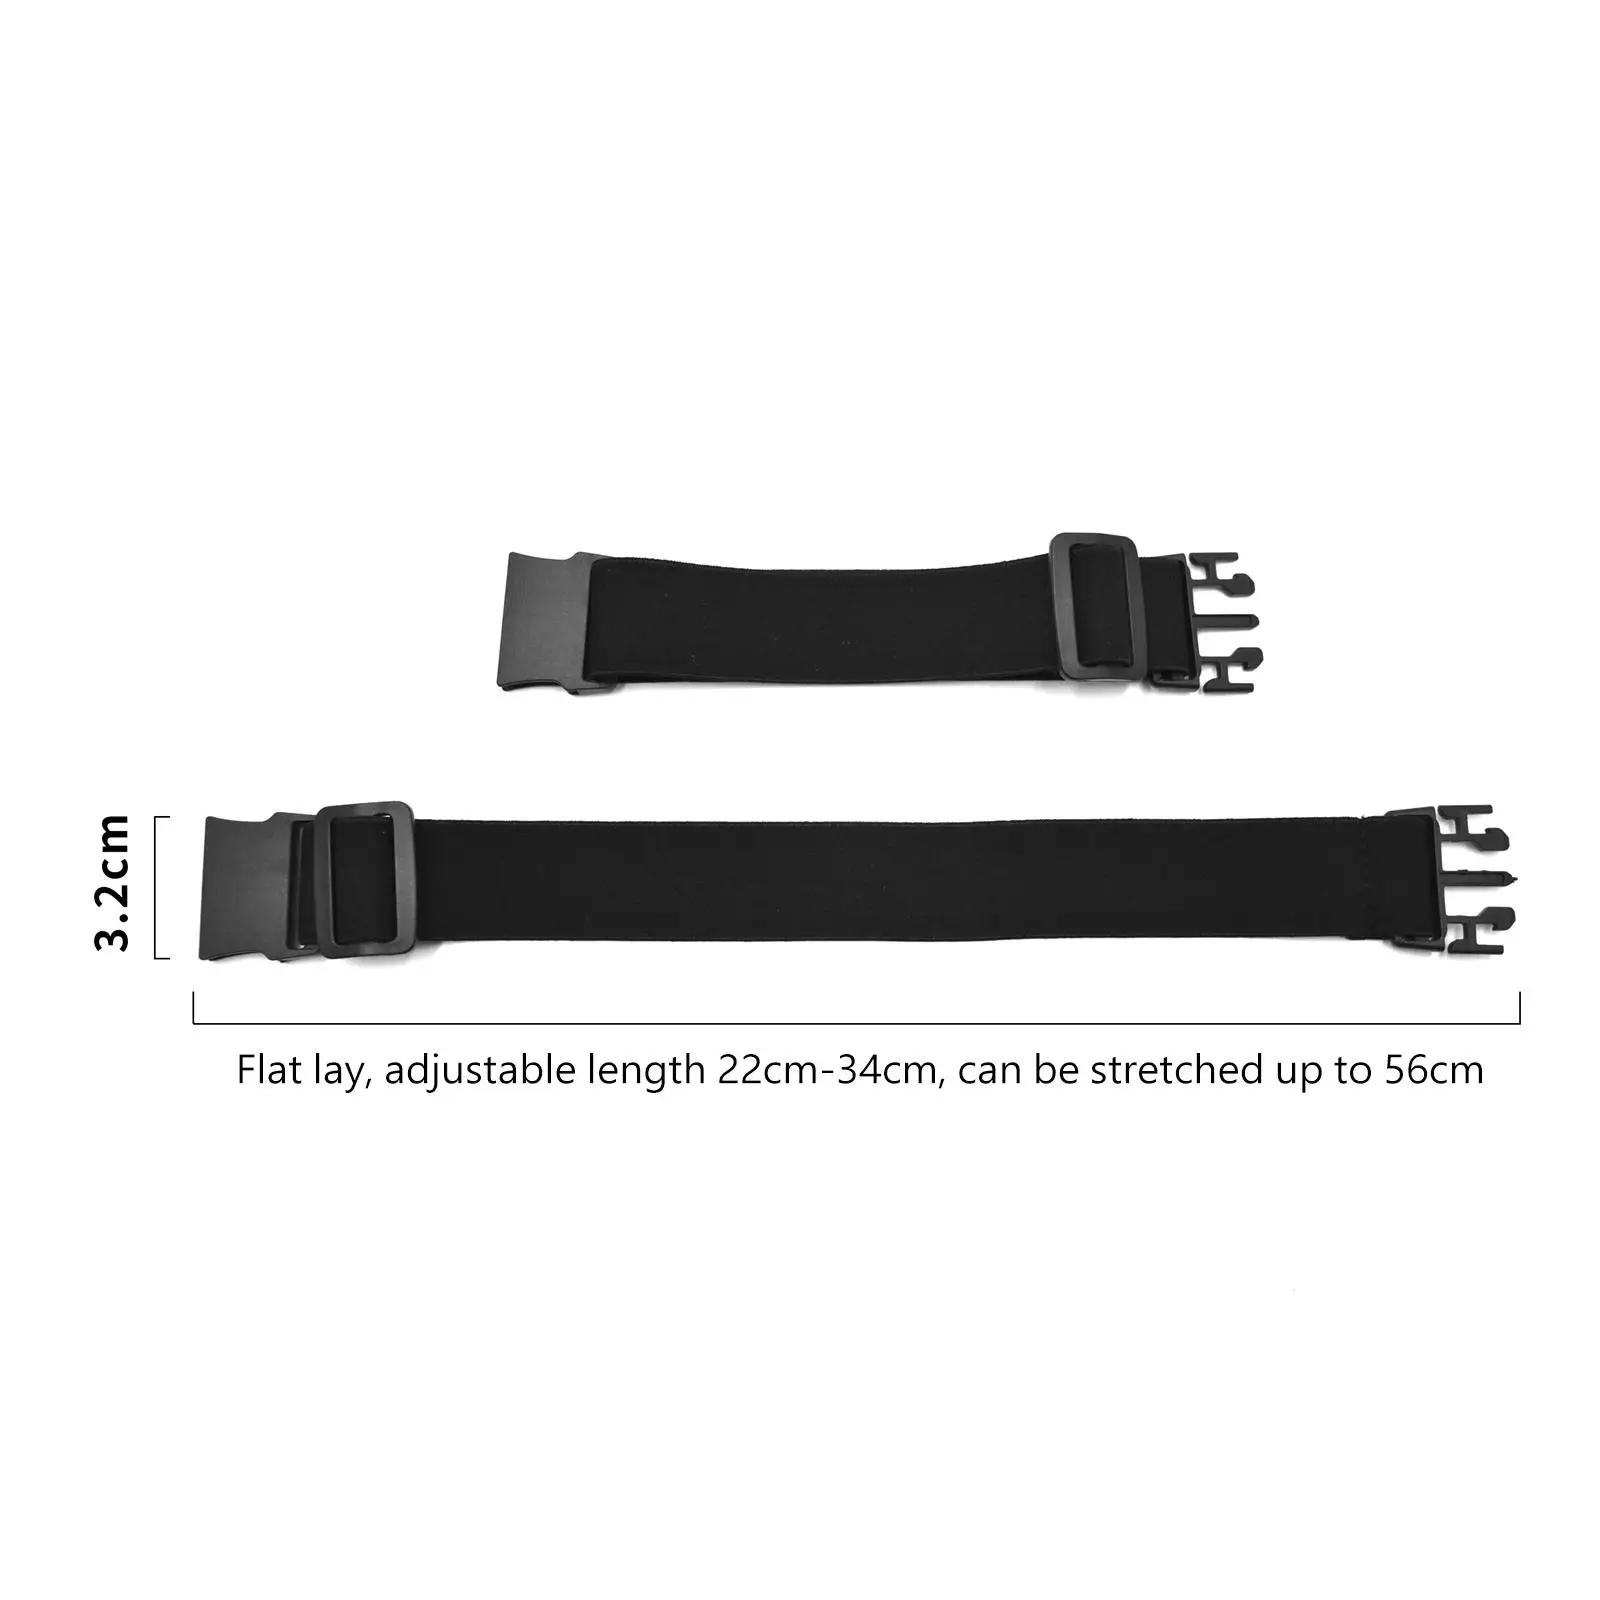 2 Pieces No Buckle Elastic Belt Waist Belt without Buckle Elastic Stretch Belt for Travel Everyday Wear Adult and Kids Men Women